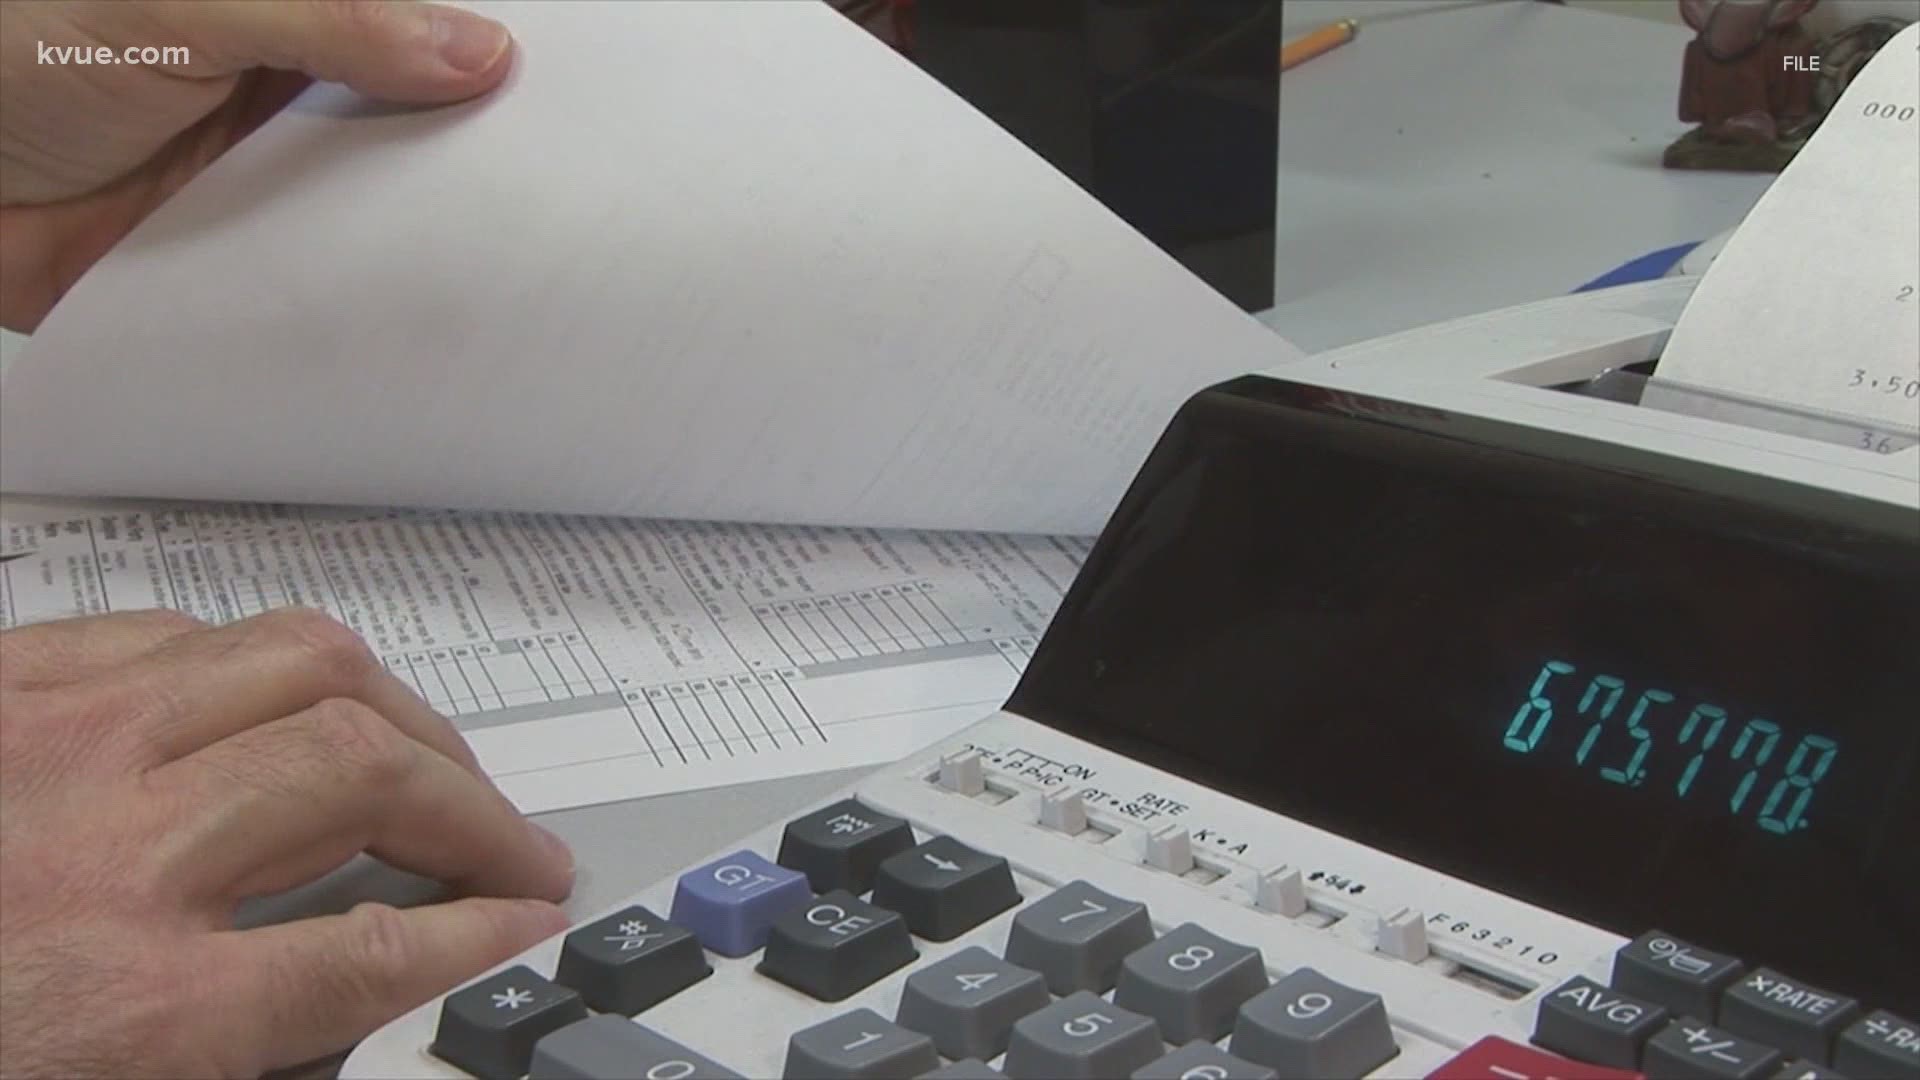 Texans are getting an extra two months to file their taxes. Instead of April 15, the IRS has extended the deadline in Texas to June 15.